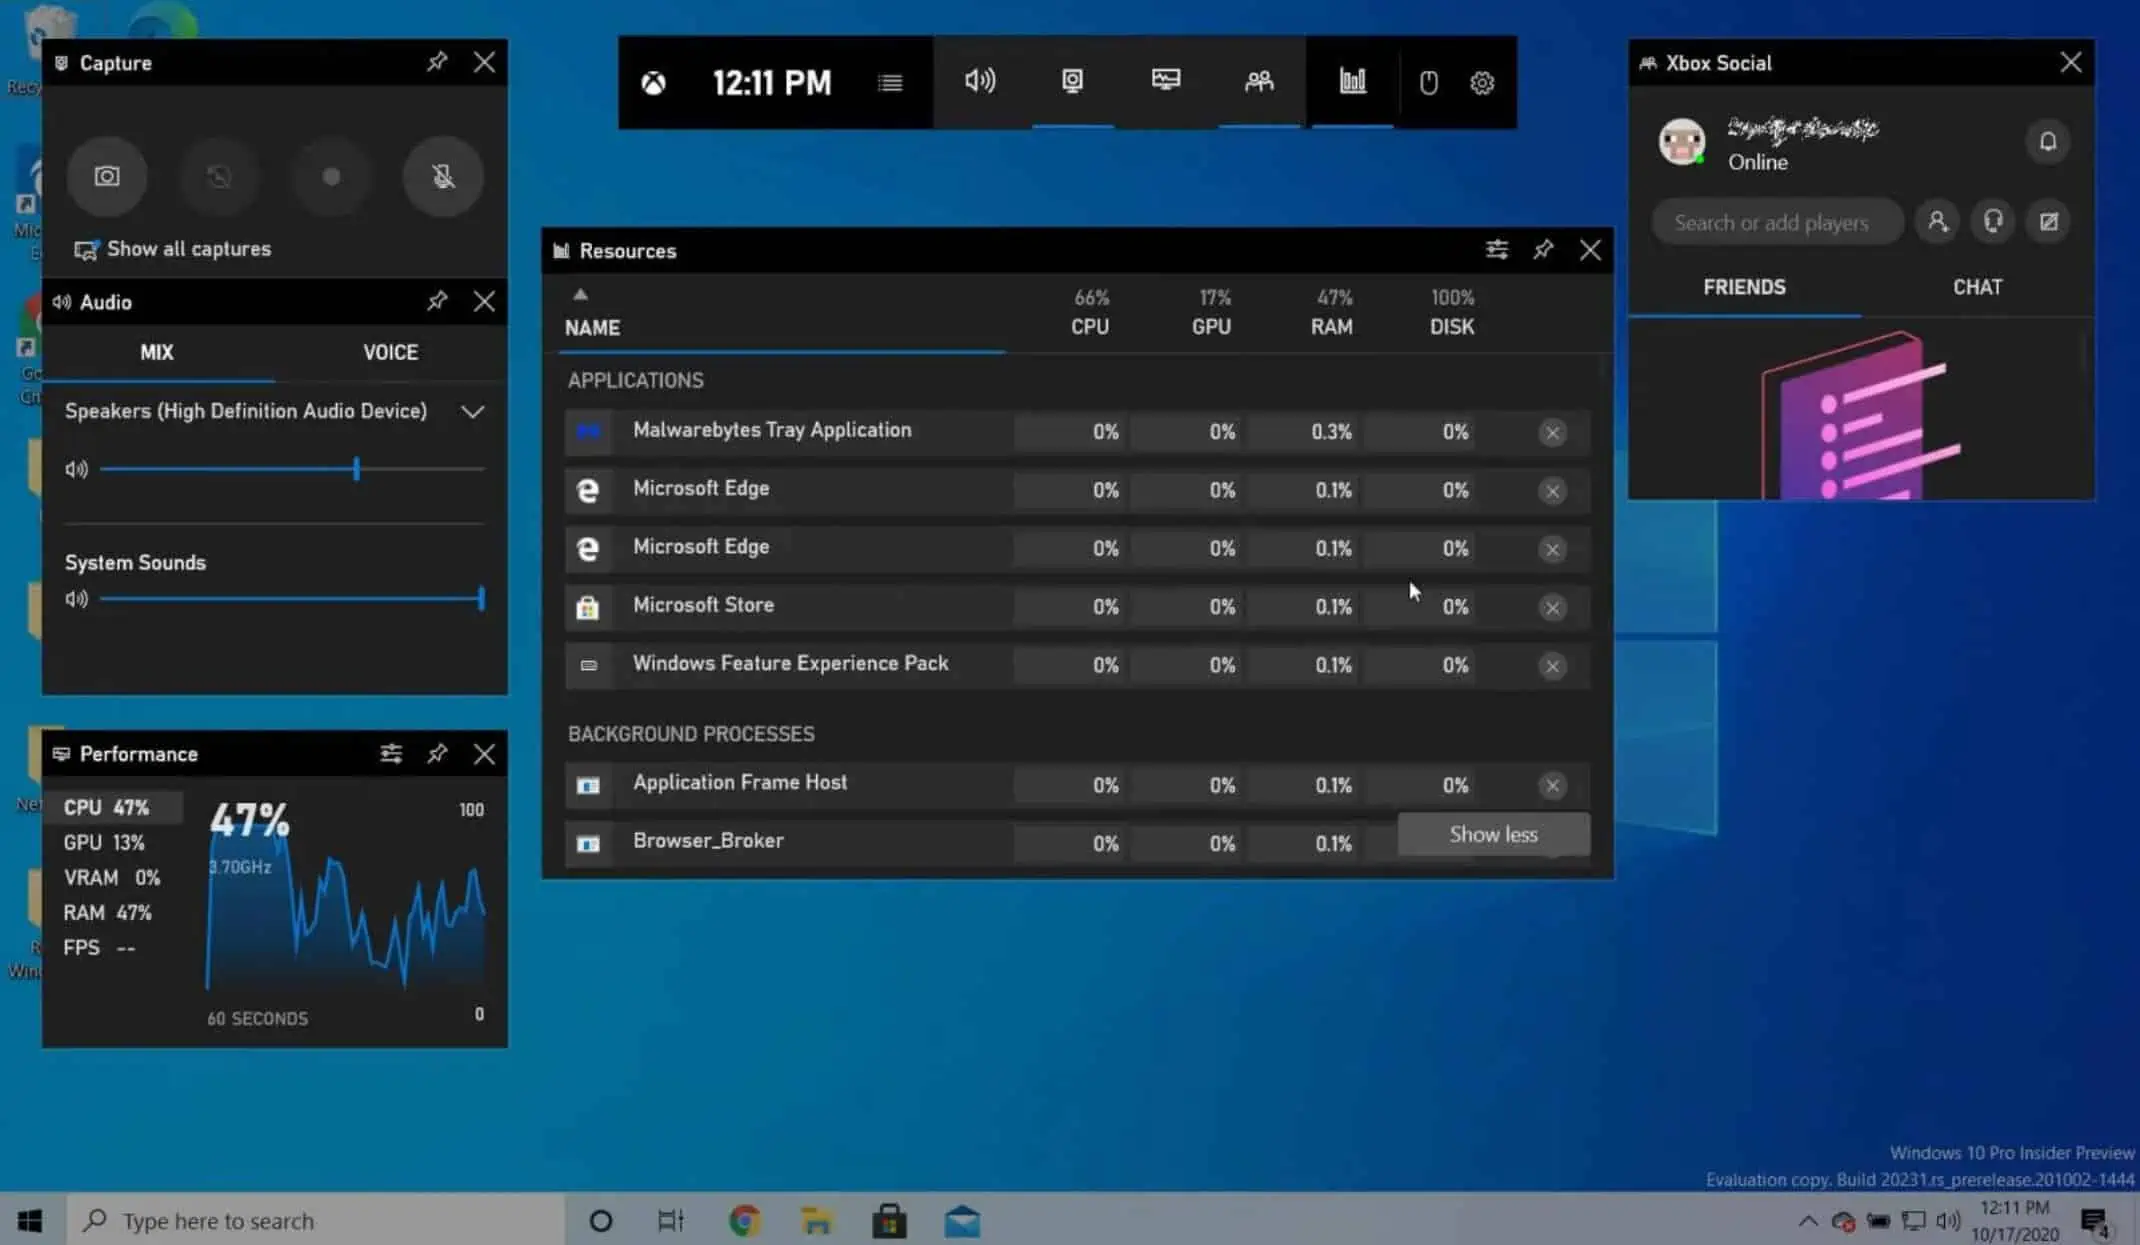 Microsoft releases new Resources widget for Windows 10 devices